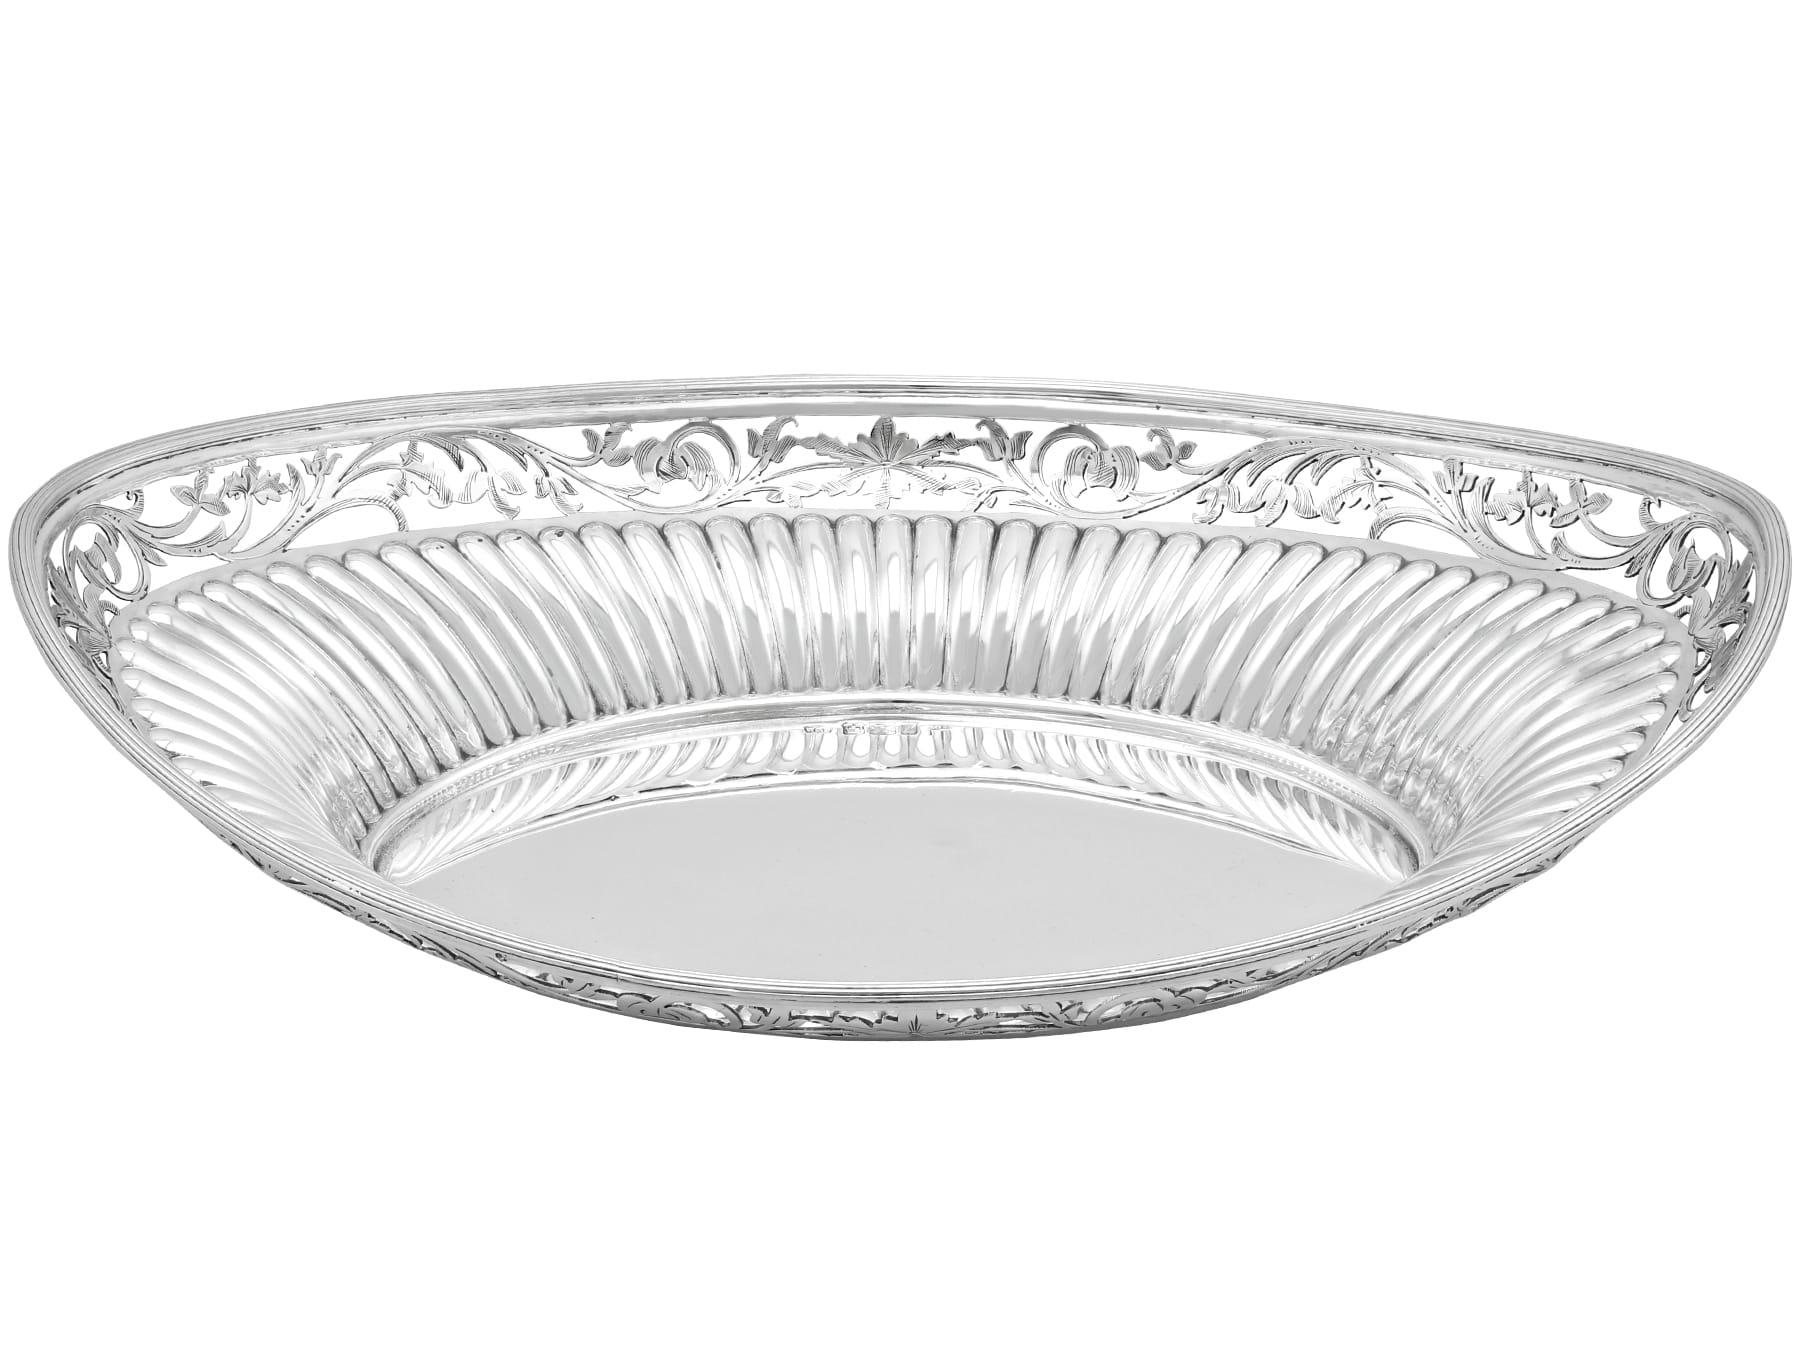 An exceptional, fine and impressive antique Victorian English sterling silver bread dish; an addition to our dining silverware collection

This exceptional antique Victorian bread serving dish, in sterling silver, has an oval shaped form.

The